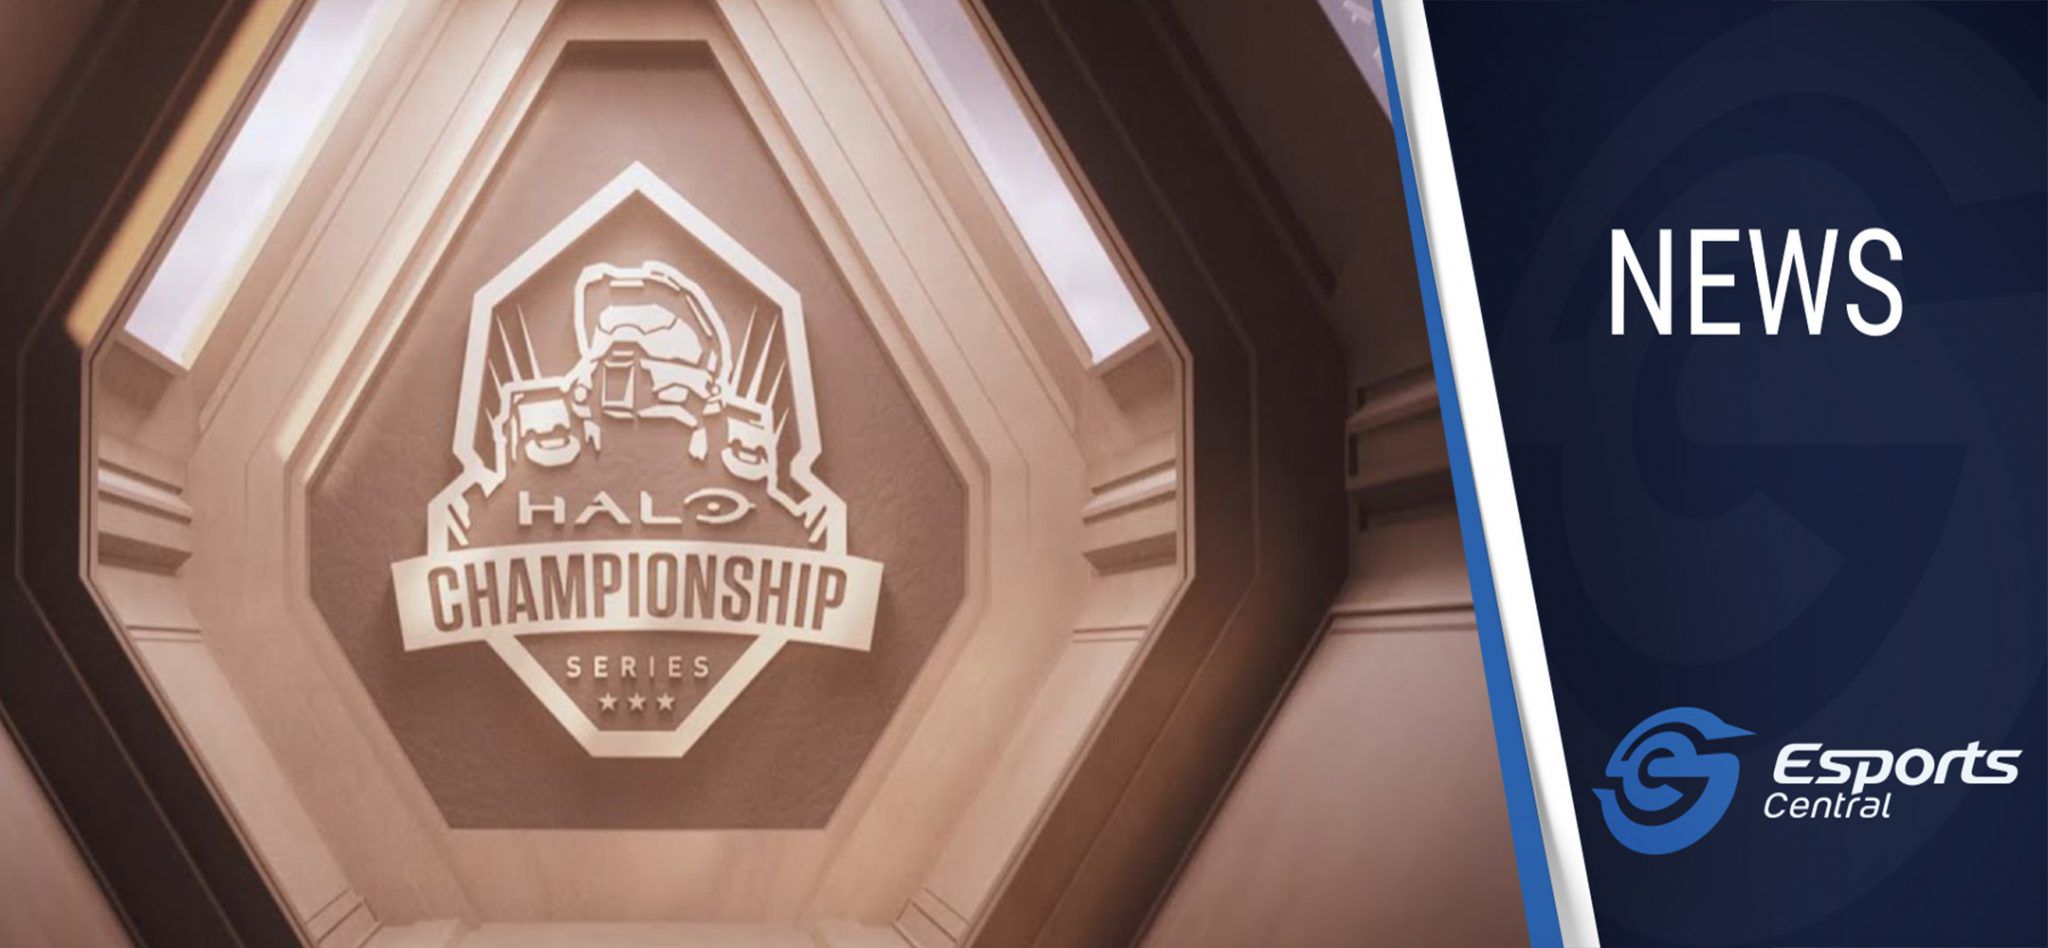 Halo Infinite Championship Series launch partners announced Esports